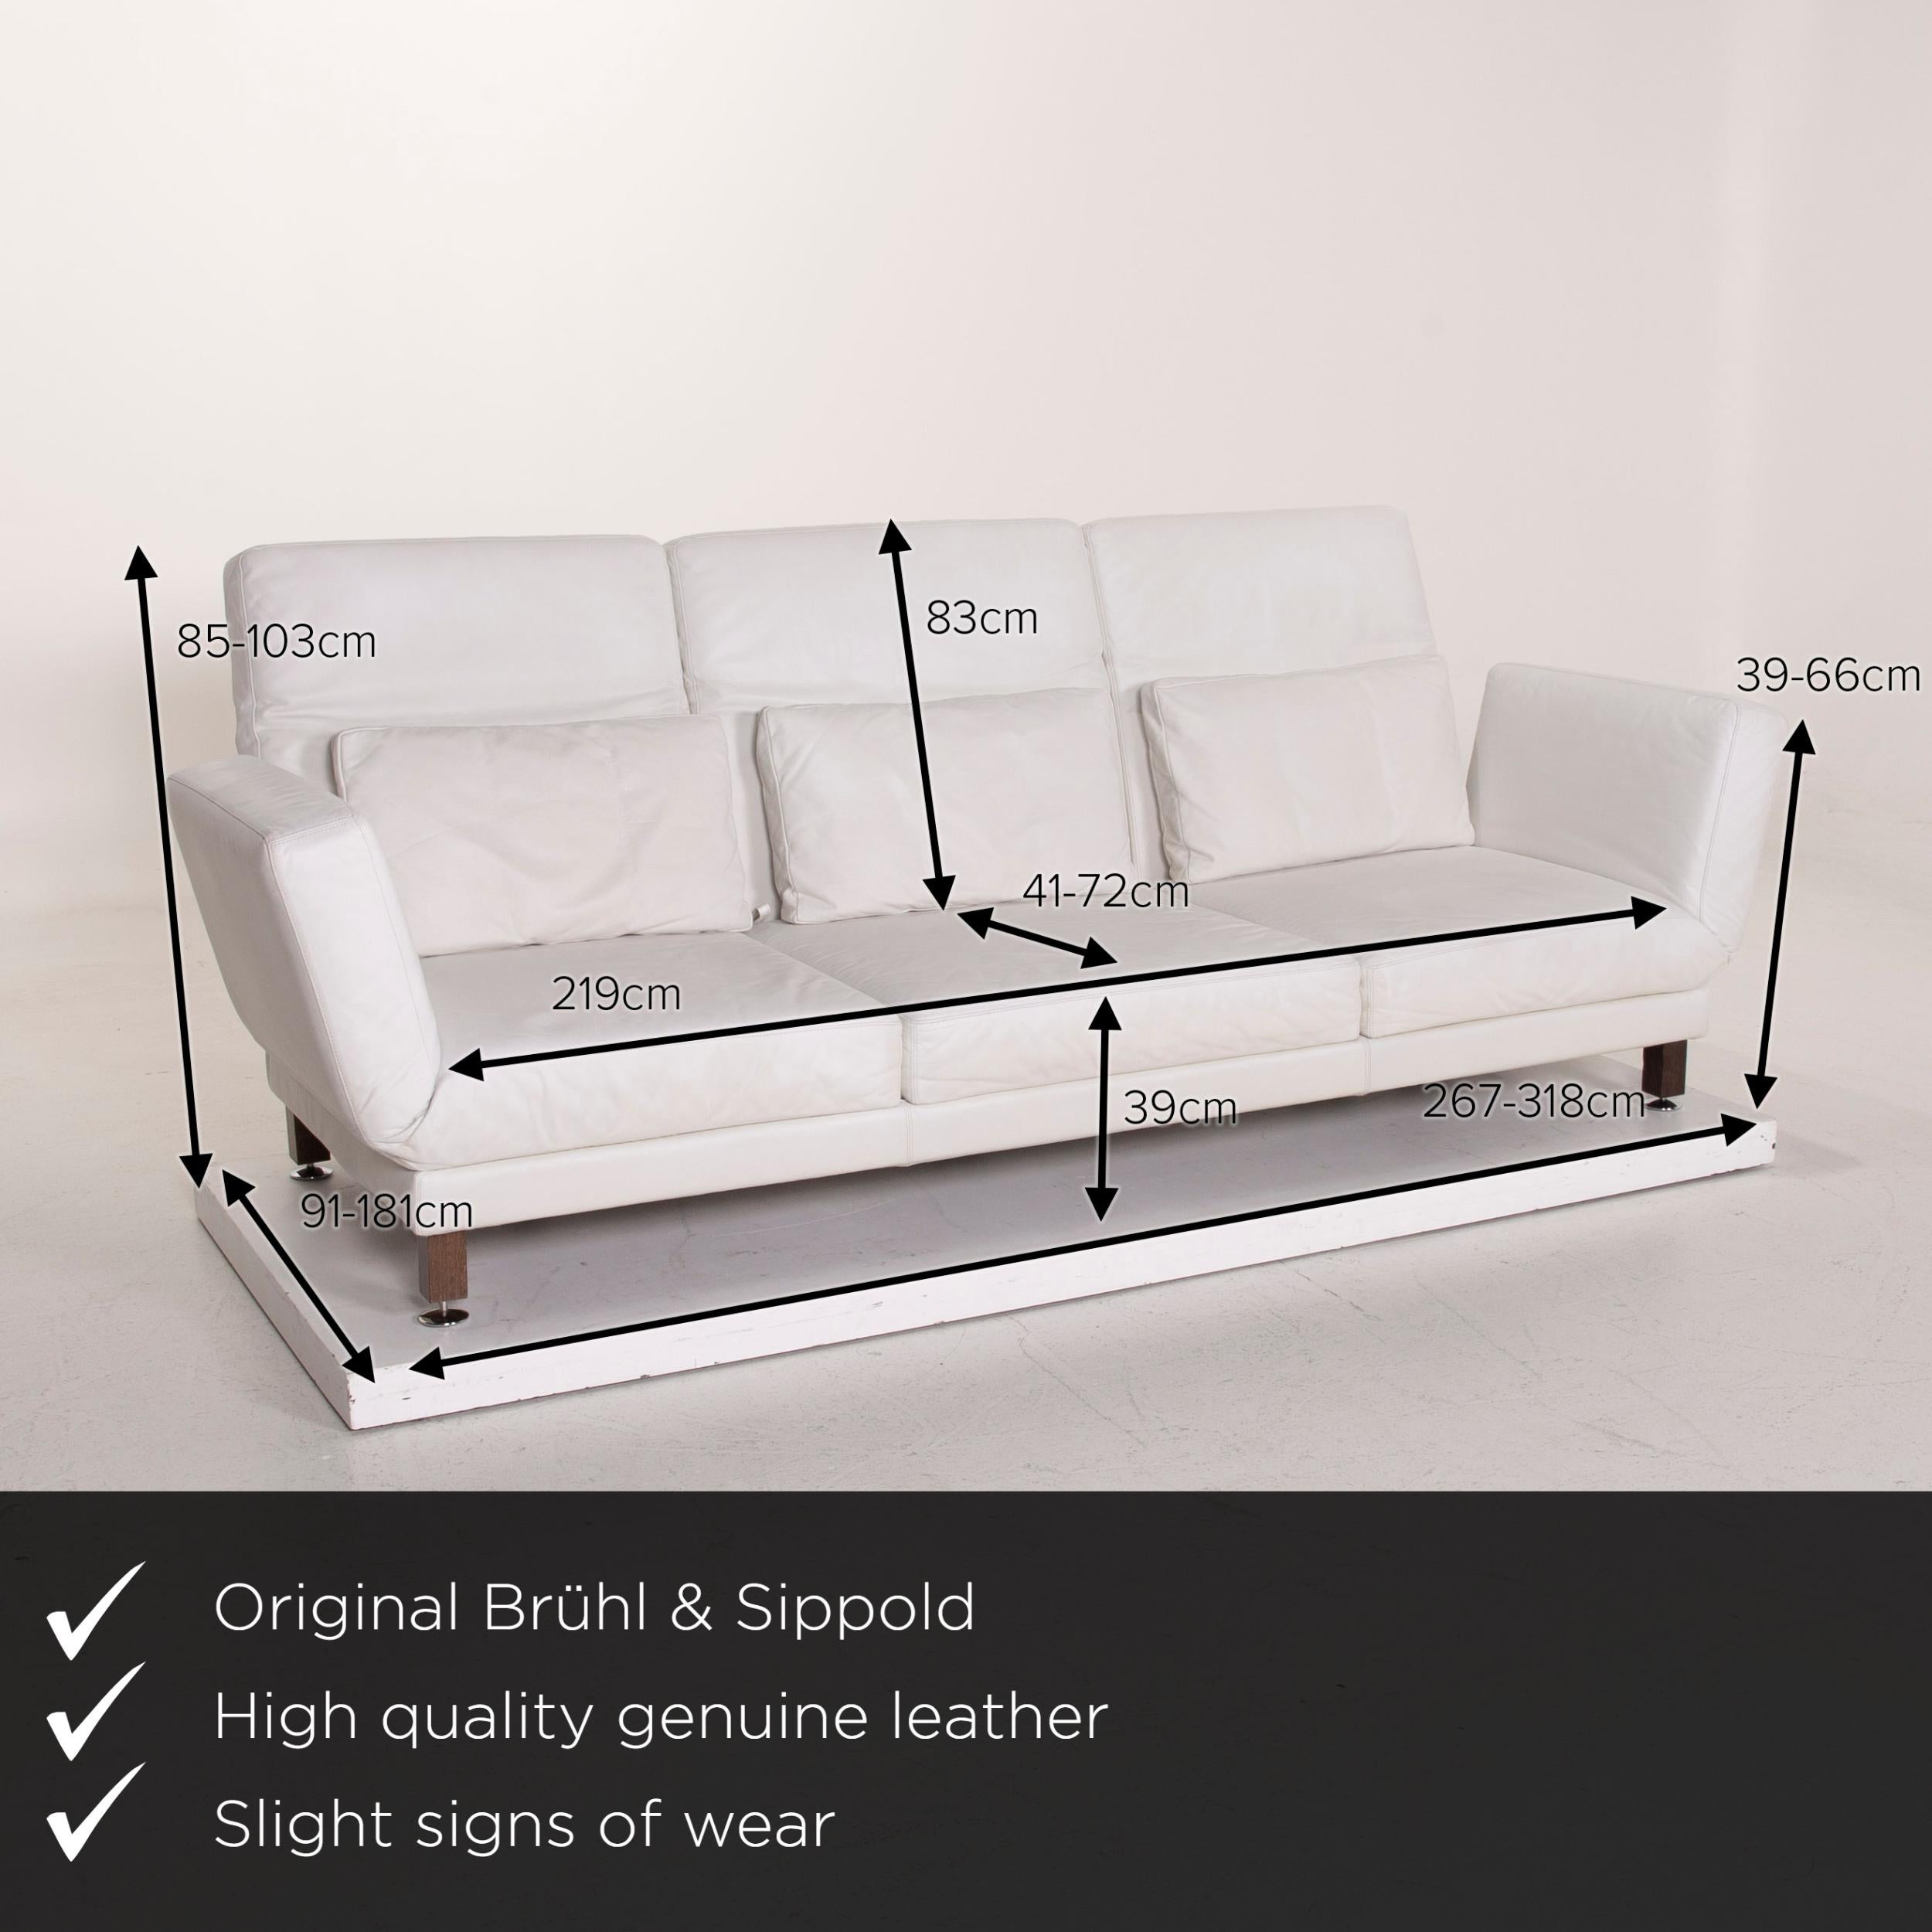 We present to you a Brühl & Sippold Moule leather sofa set white three-seater relax function stool.
  
 

 Product measurements in centimeters:
 

Depth 91
Width 267
Height 103
Seat height 39
Rest height 39
Seat depth 41
Seat width